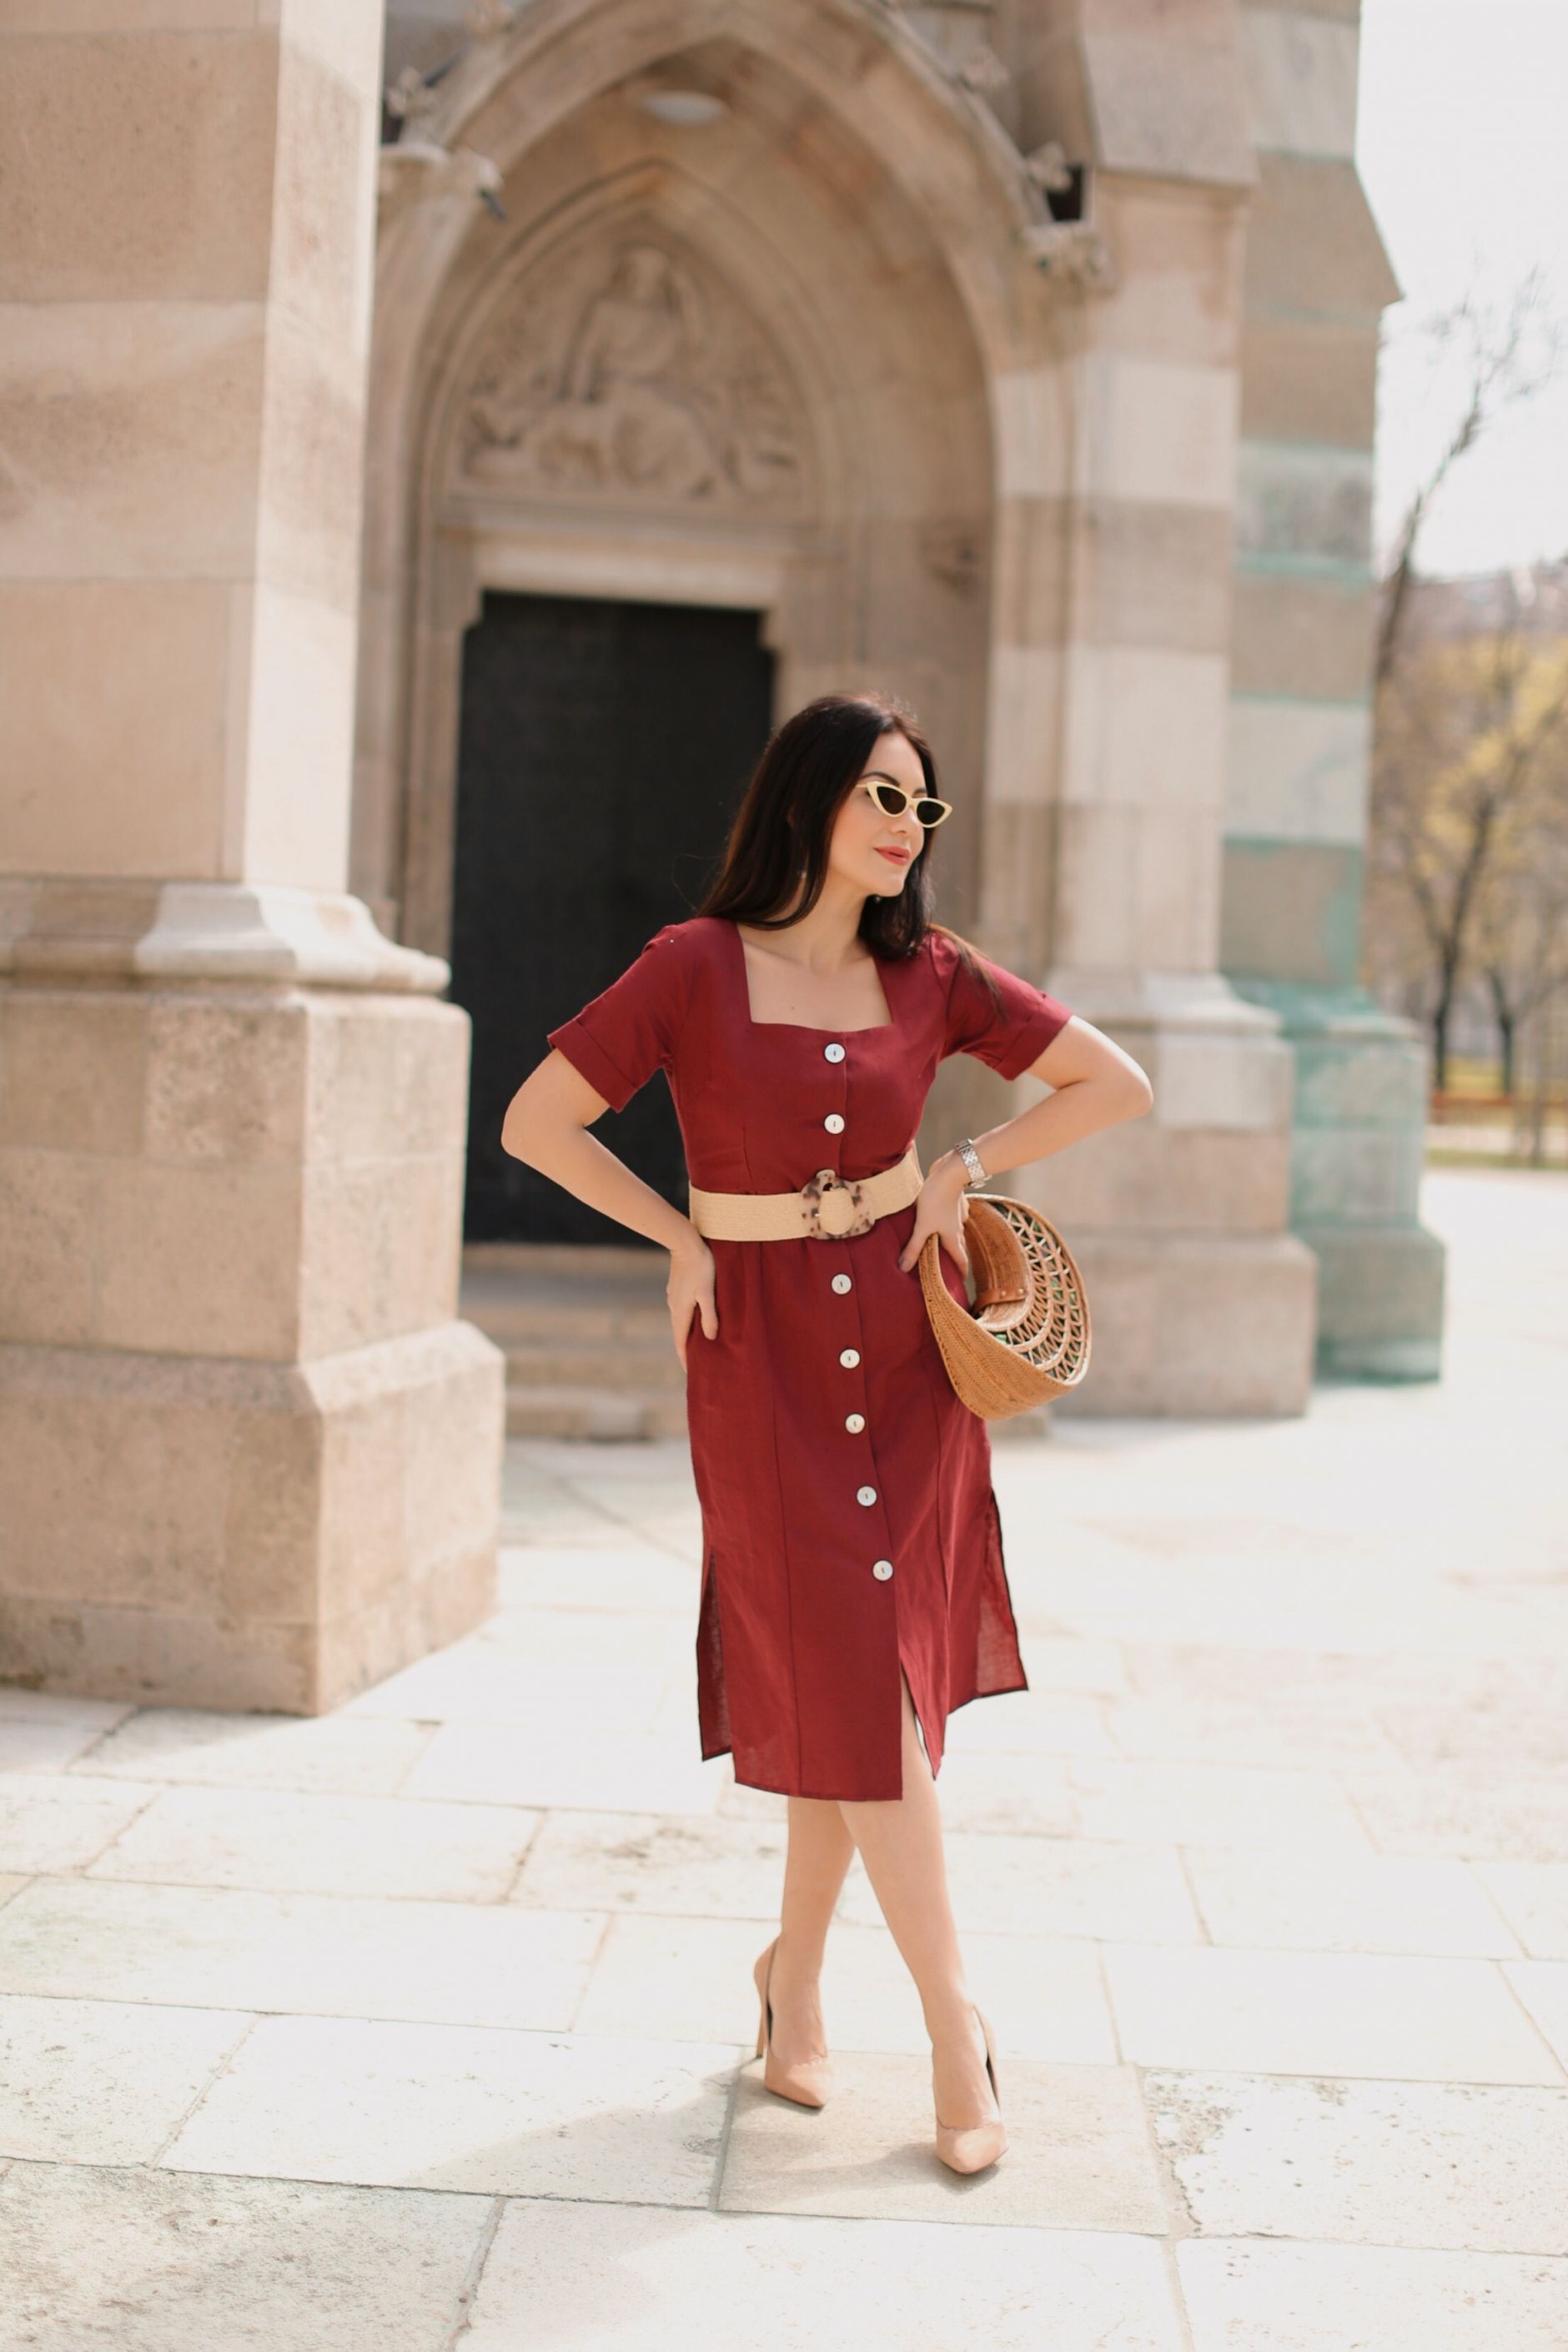 THE LOOK: THIS SEASON’S MUST-HAVE DRESSES